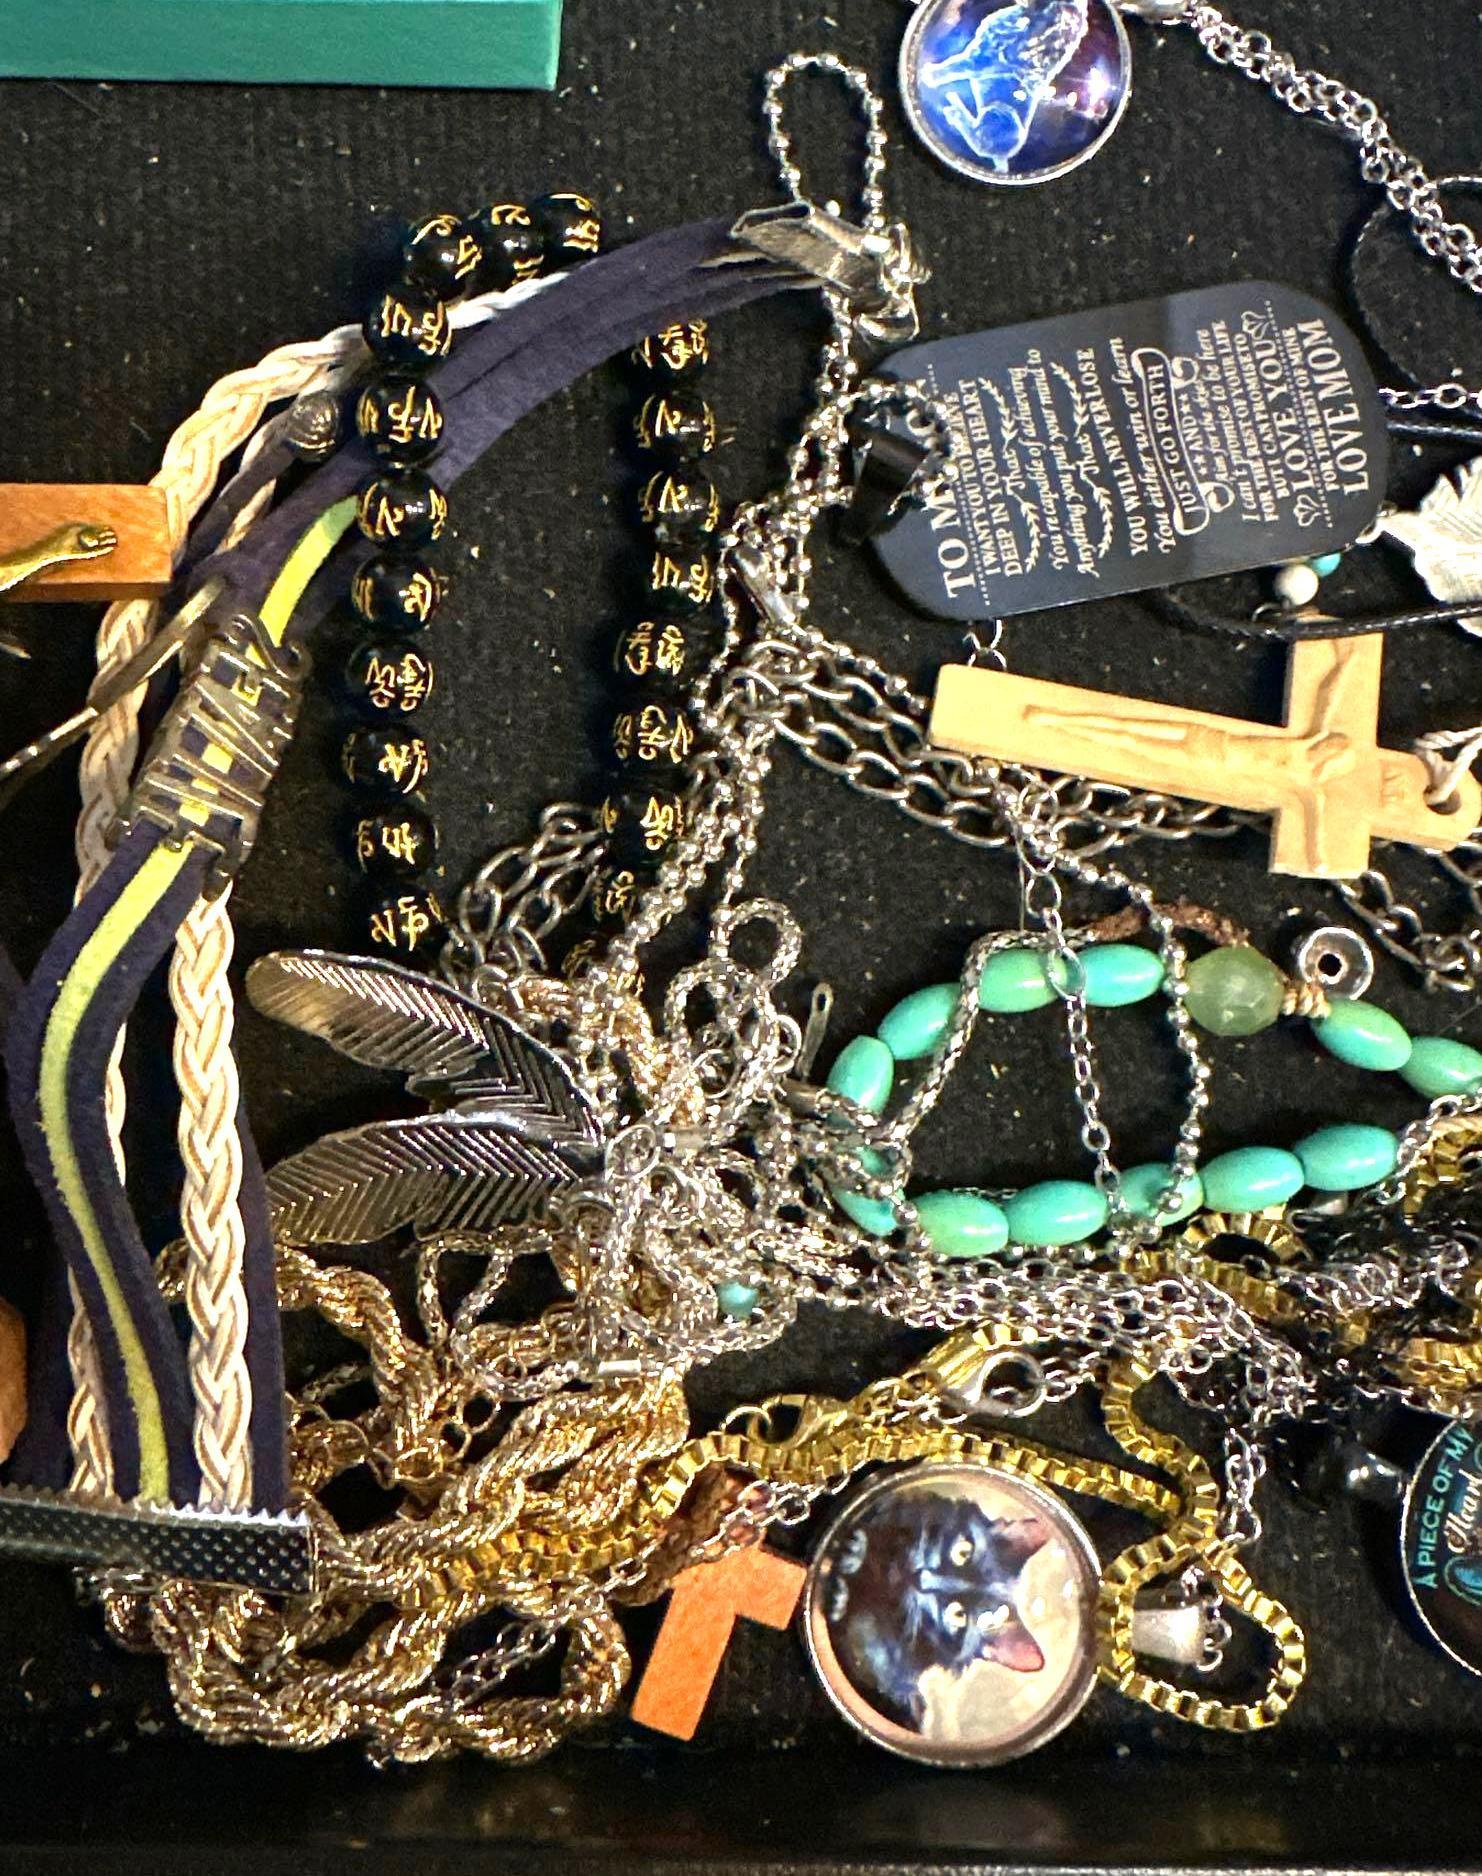 Group of Unsearched Jewelry From Storage Unit